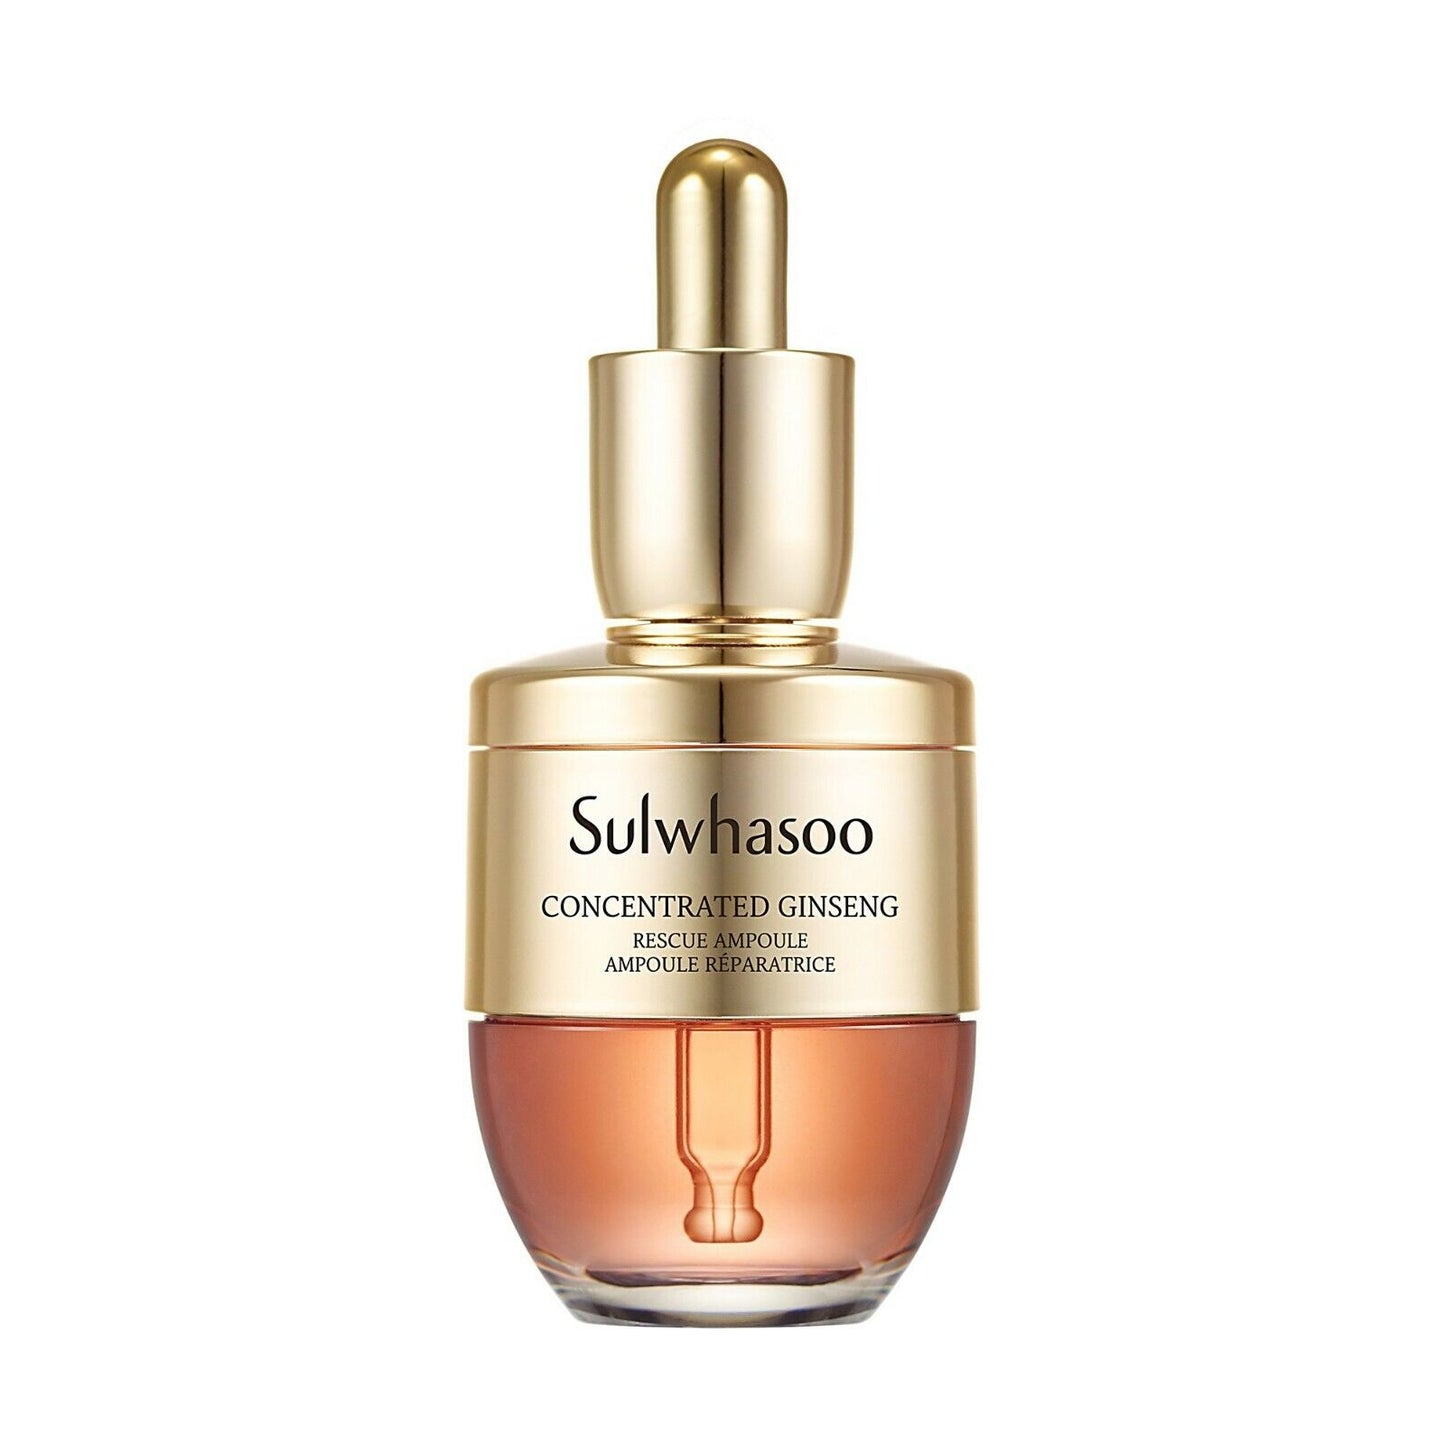 Sulwhasoo Concentrated Ginseng Rescue Ampoule 20g+Kits+O HUI Geniture Cream 30ea